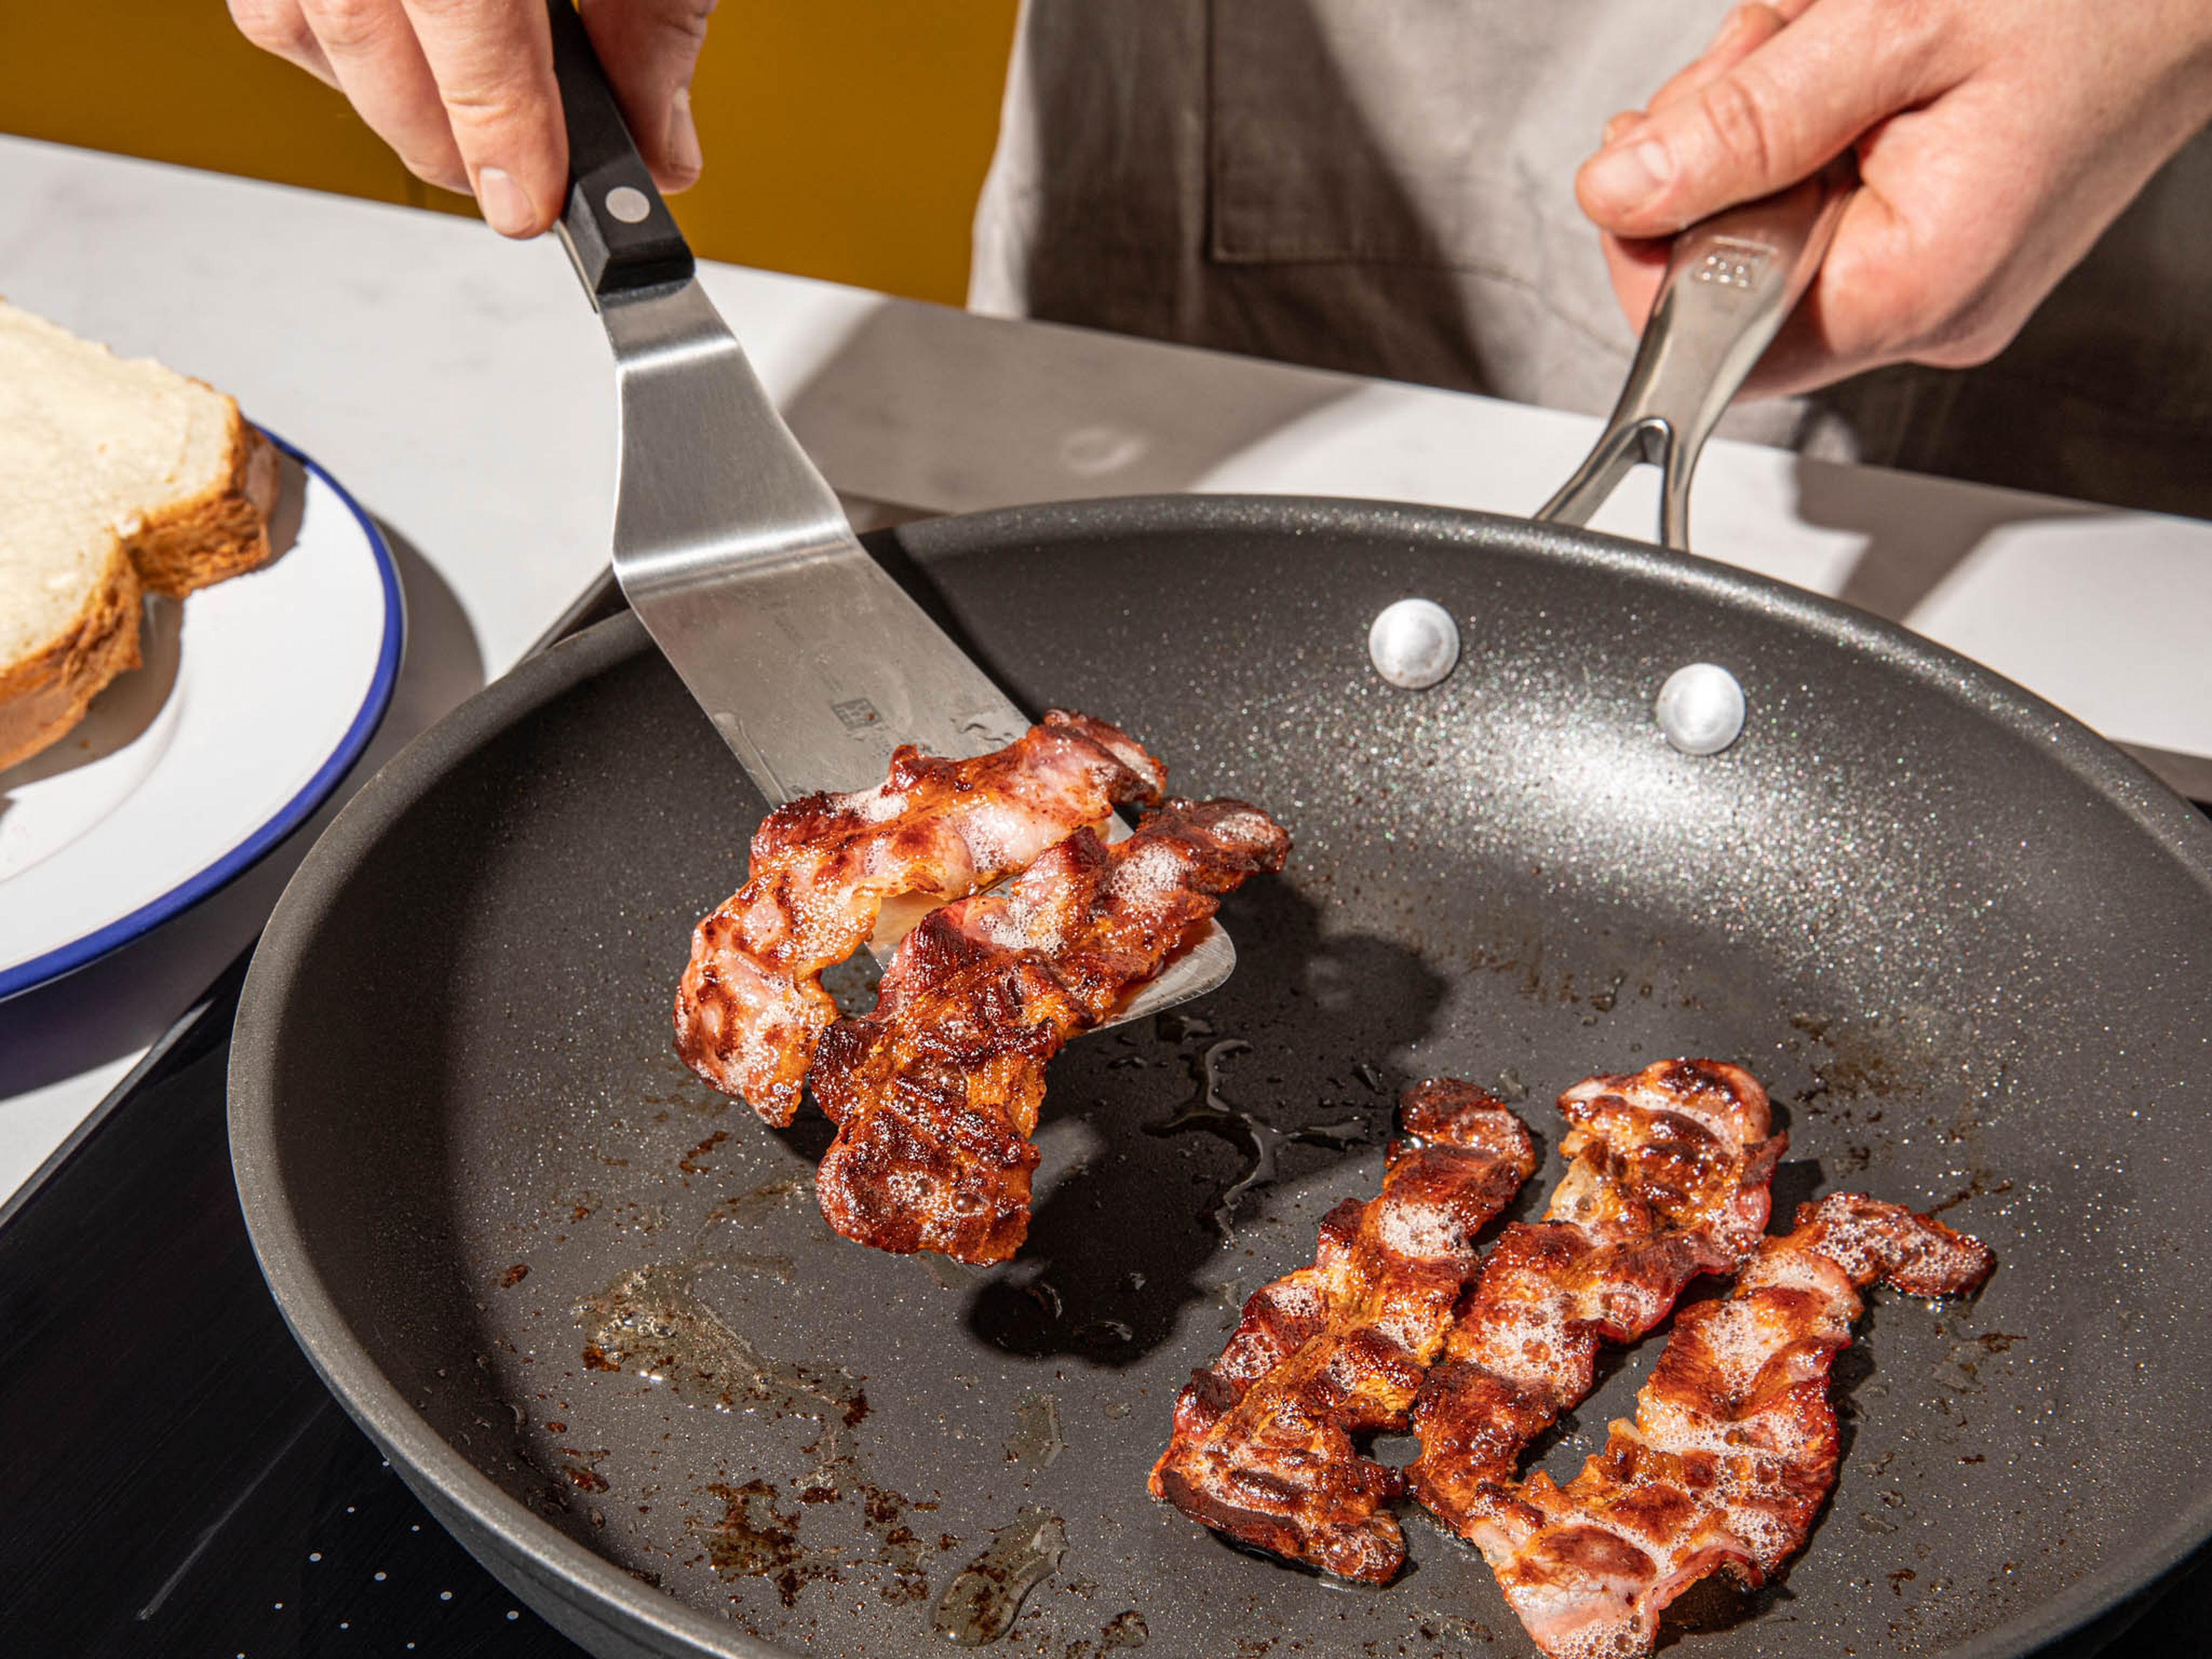 Add bacon strips to a frying pan over medium-high heat. Fry until crispy on both sides, approx. 2-3 min.